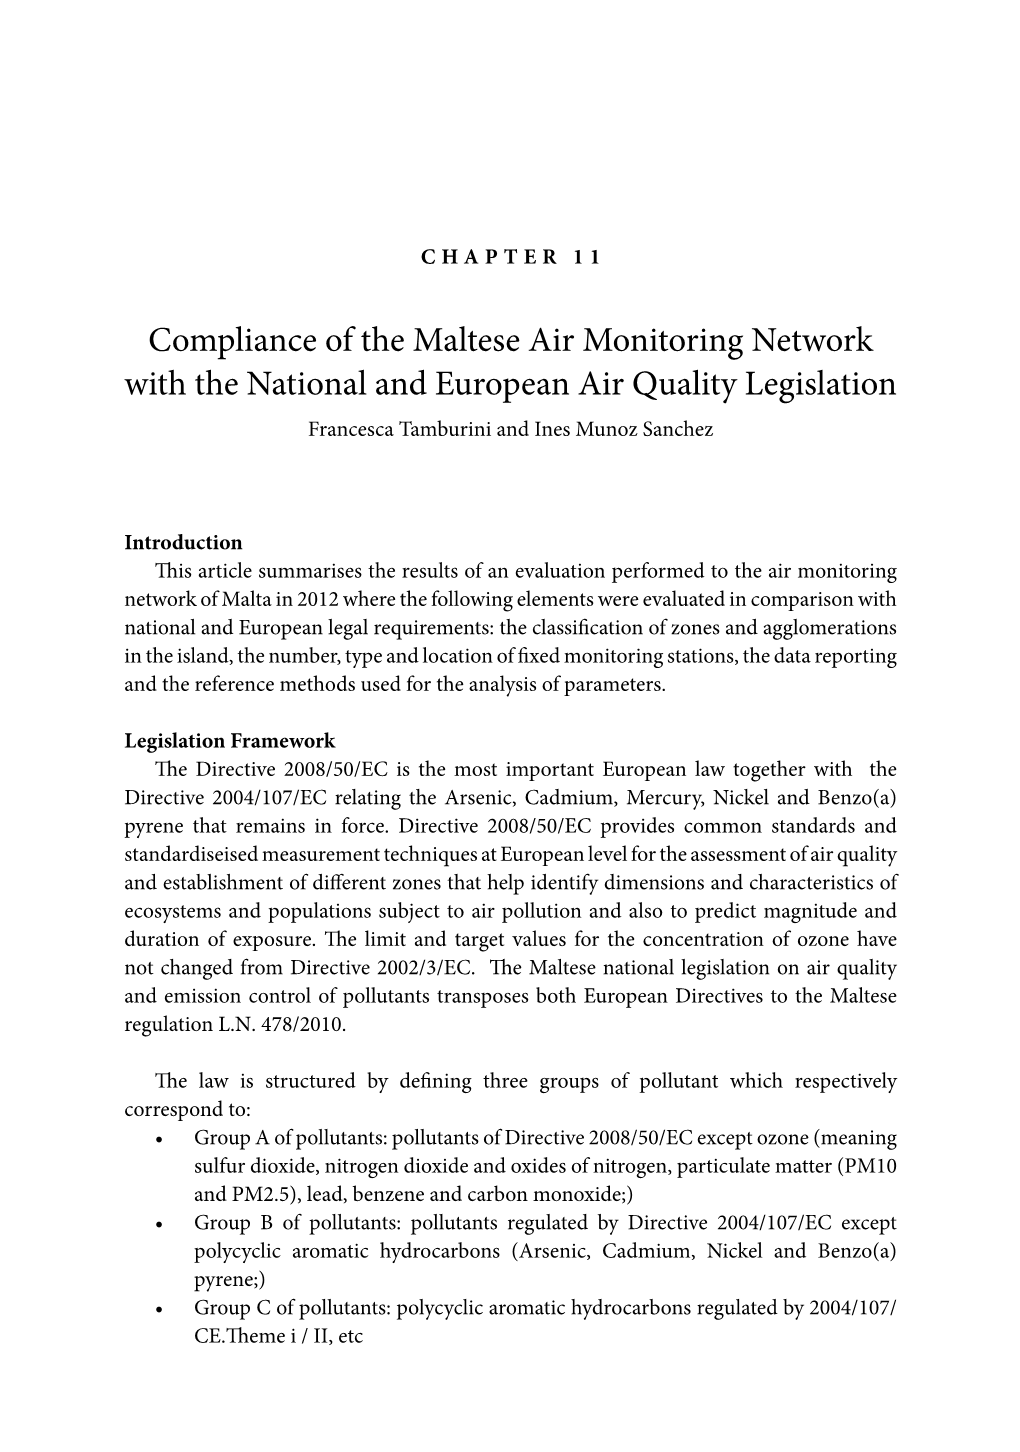 Compliance of the Maltese Air Monitoring Network with the National and European Air Quality Legislation Francesca Tamburini and Ines Munoz Sanchez